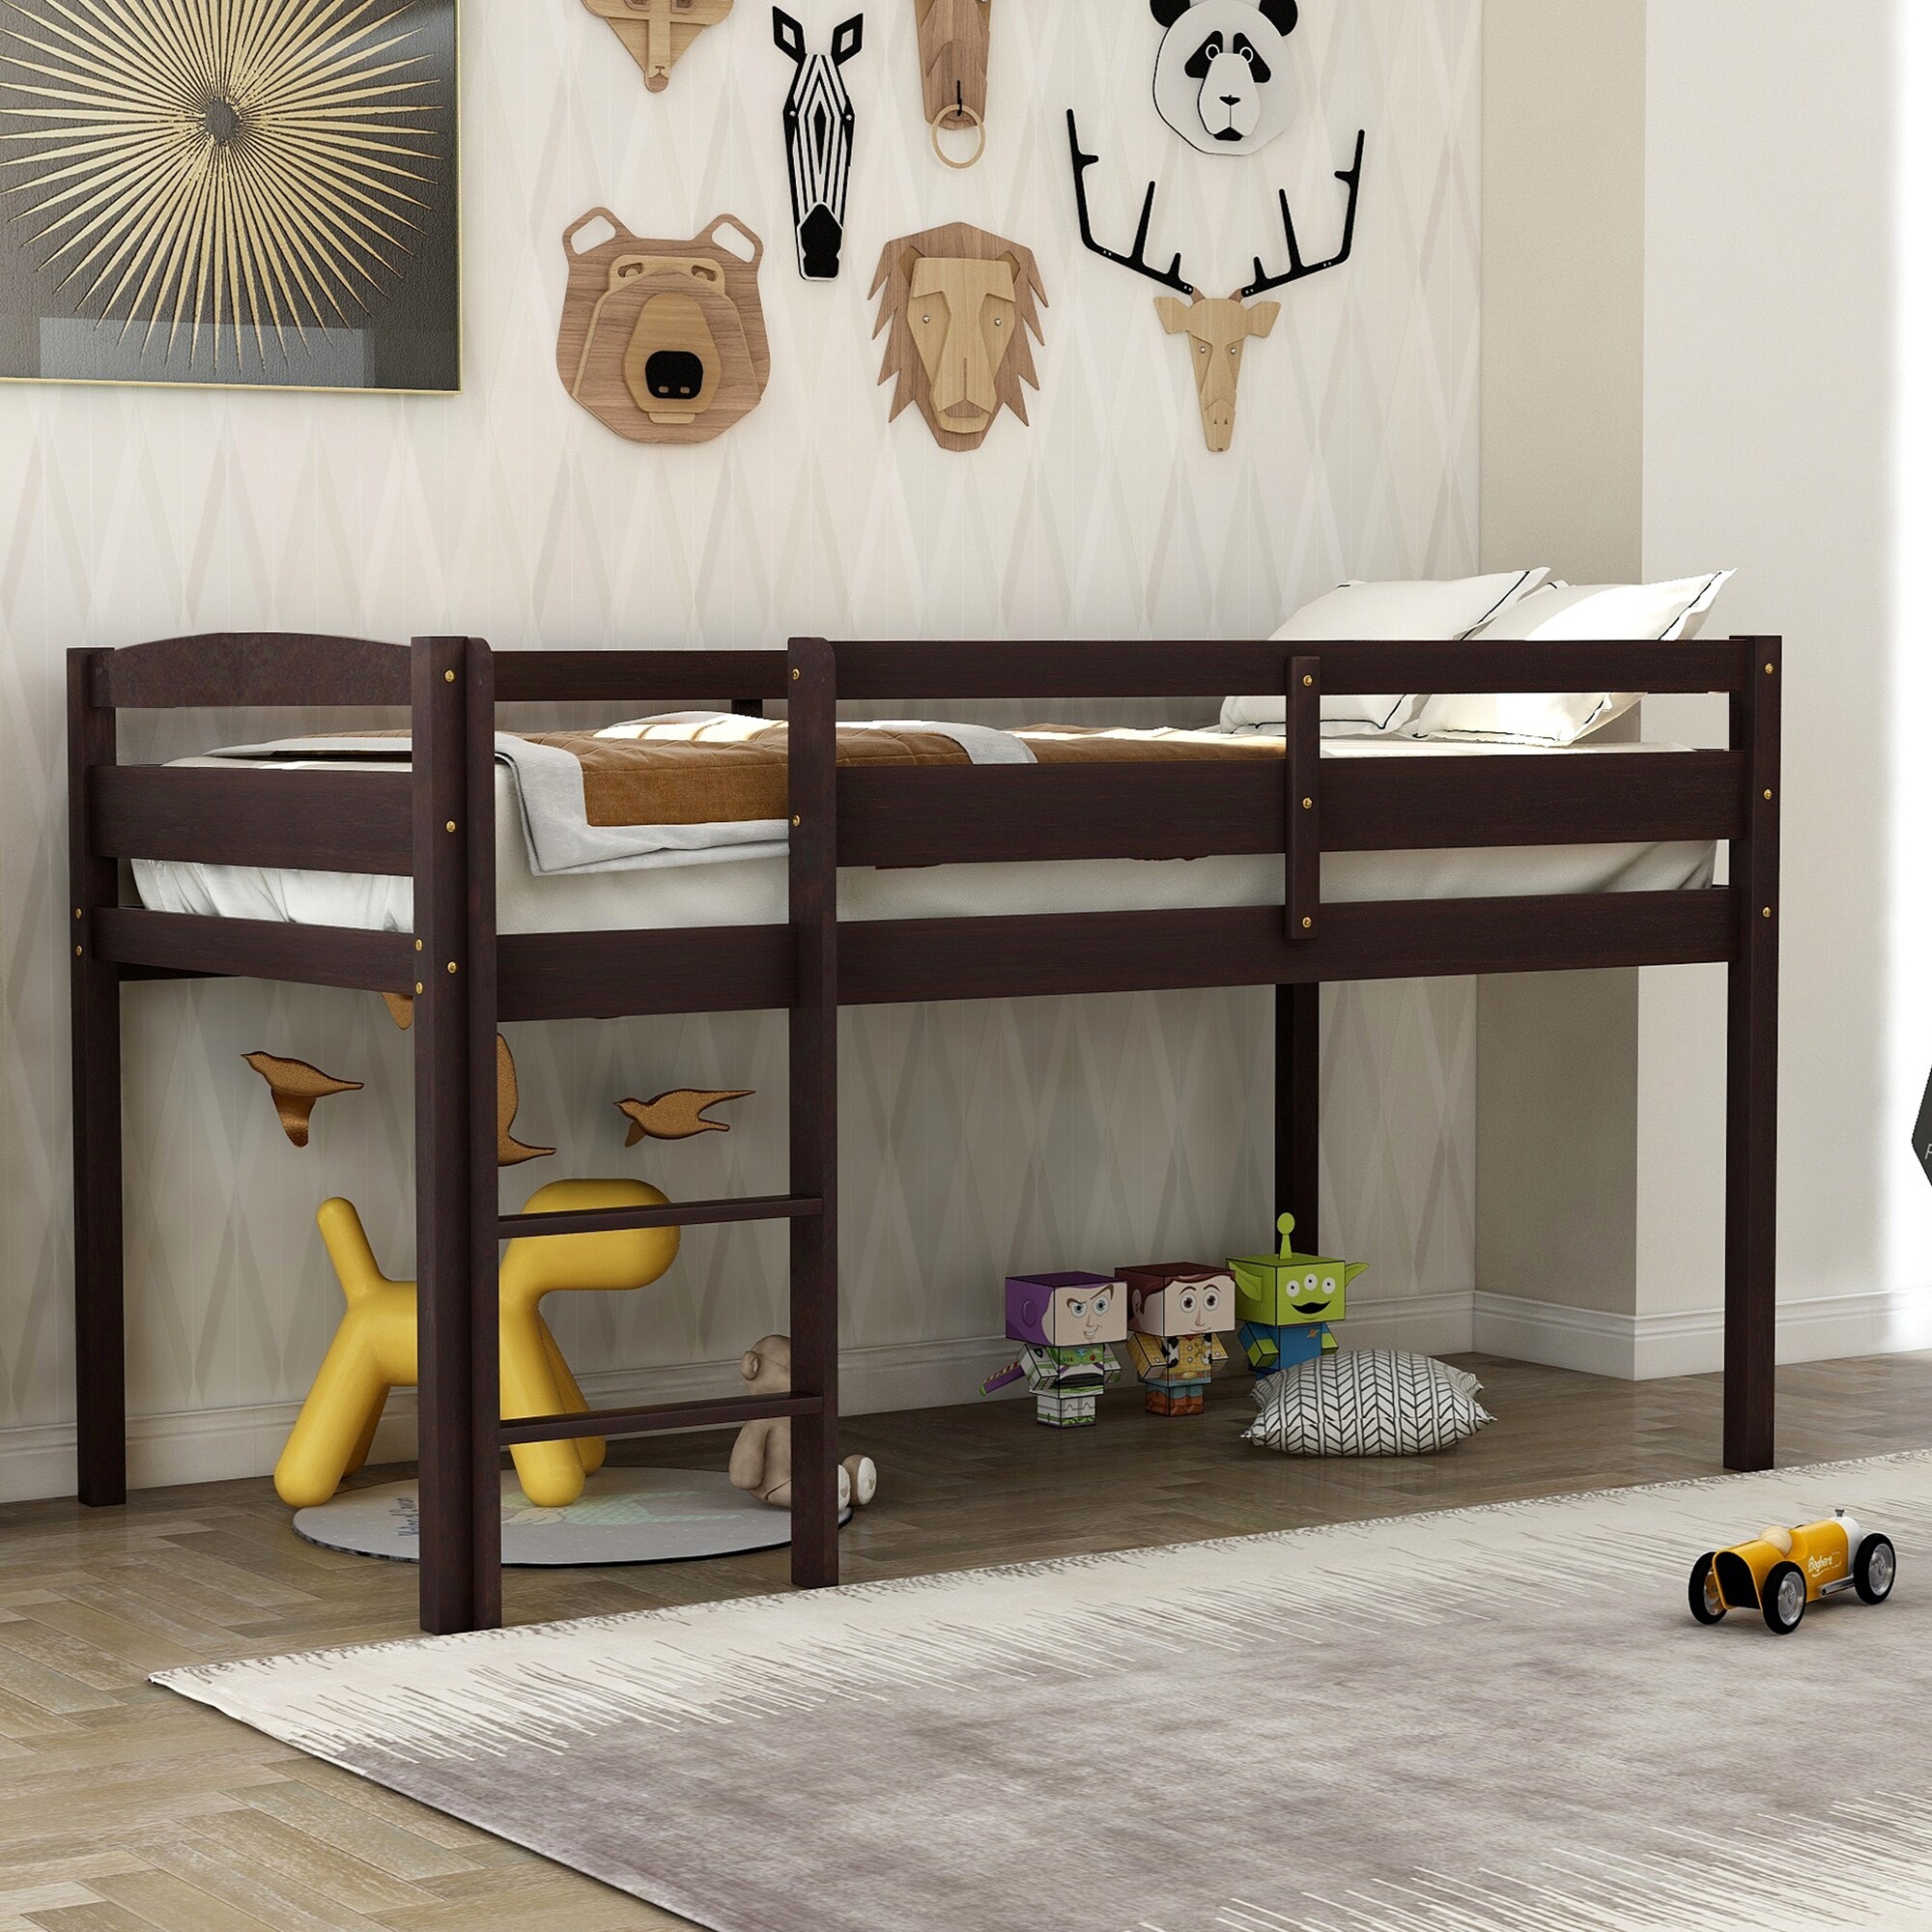 Mattress not Included JOYMOR Solid Wood Low Bunk Bed for Kids//Toddlers Twin